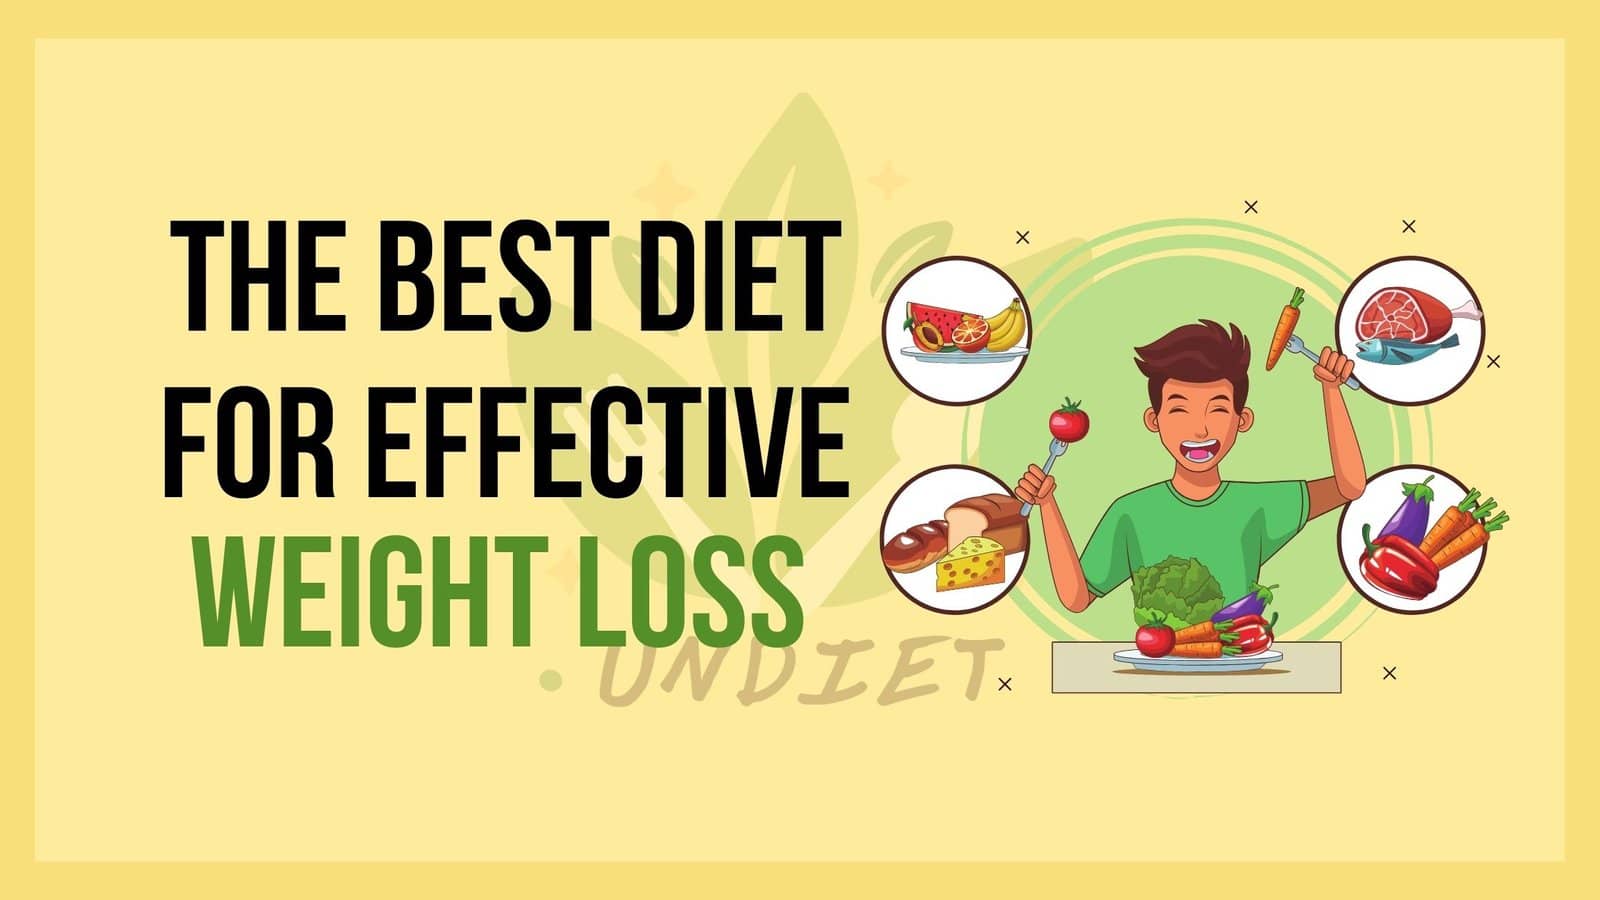 The Best Diet for Effective Weight Loss